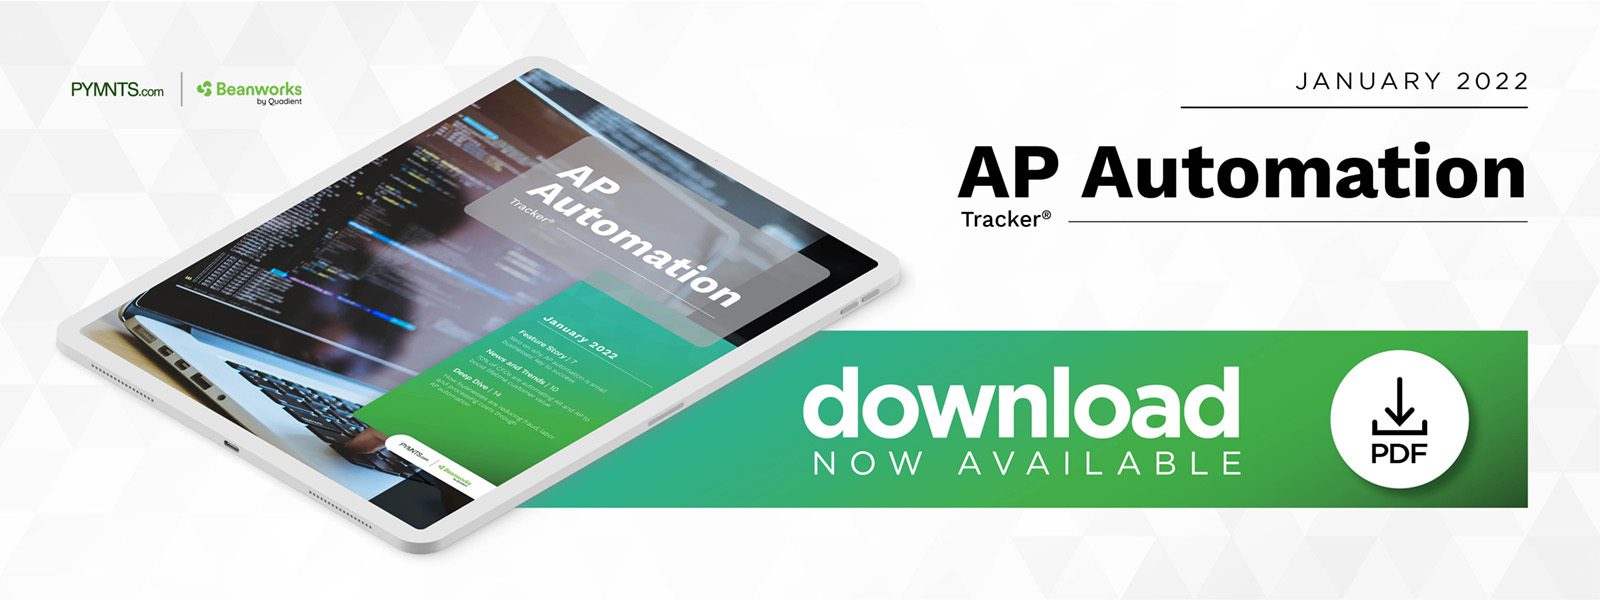 AP Automation January 2022 - Discover how AP automation can help businesses curb fraud and trim processing and labor costs